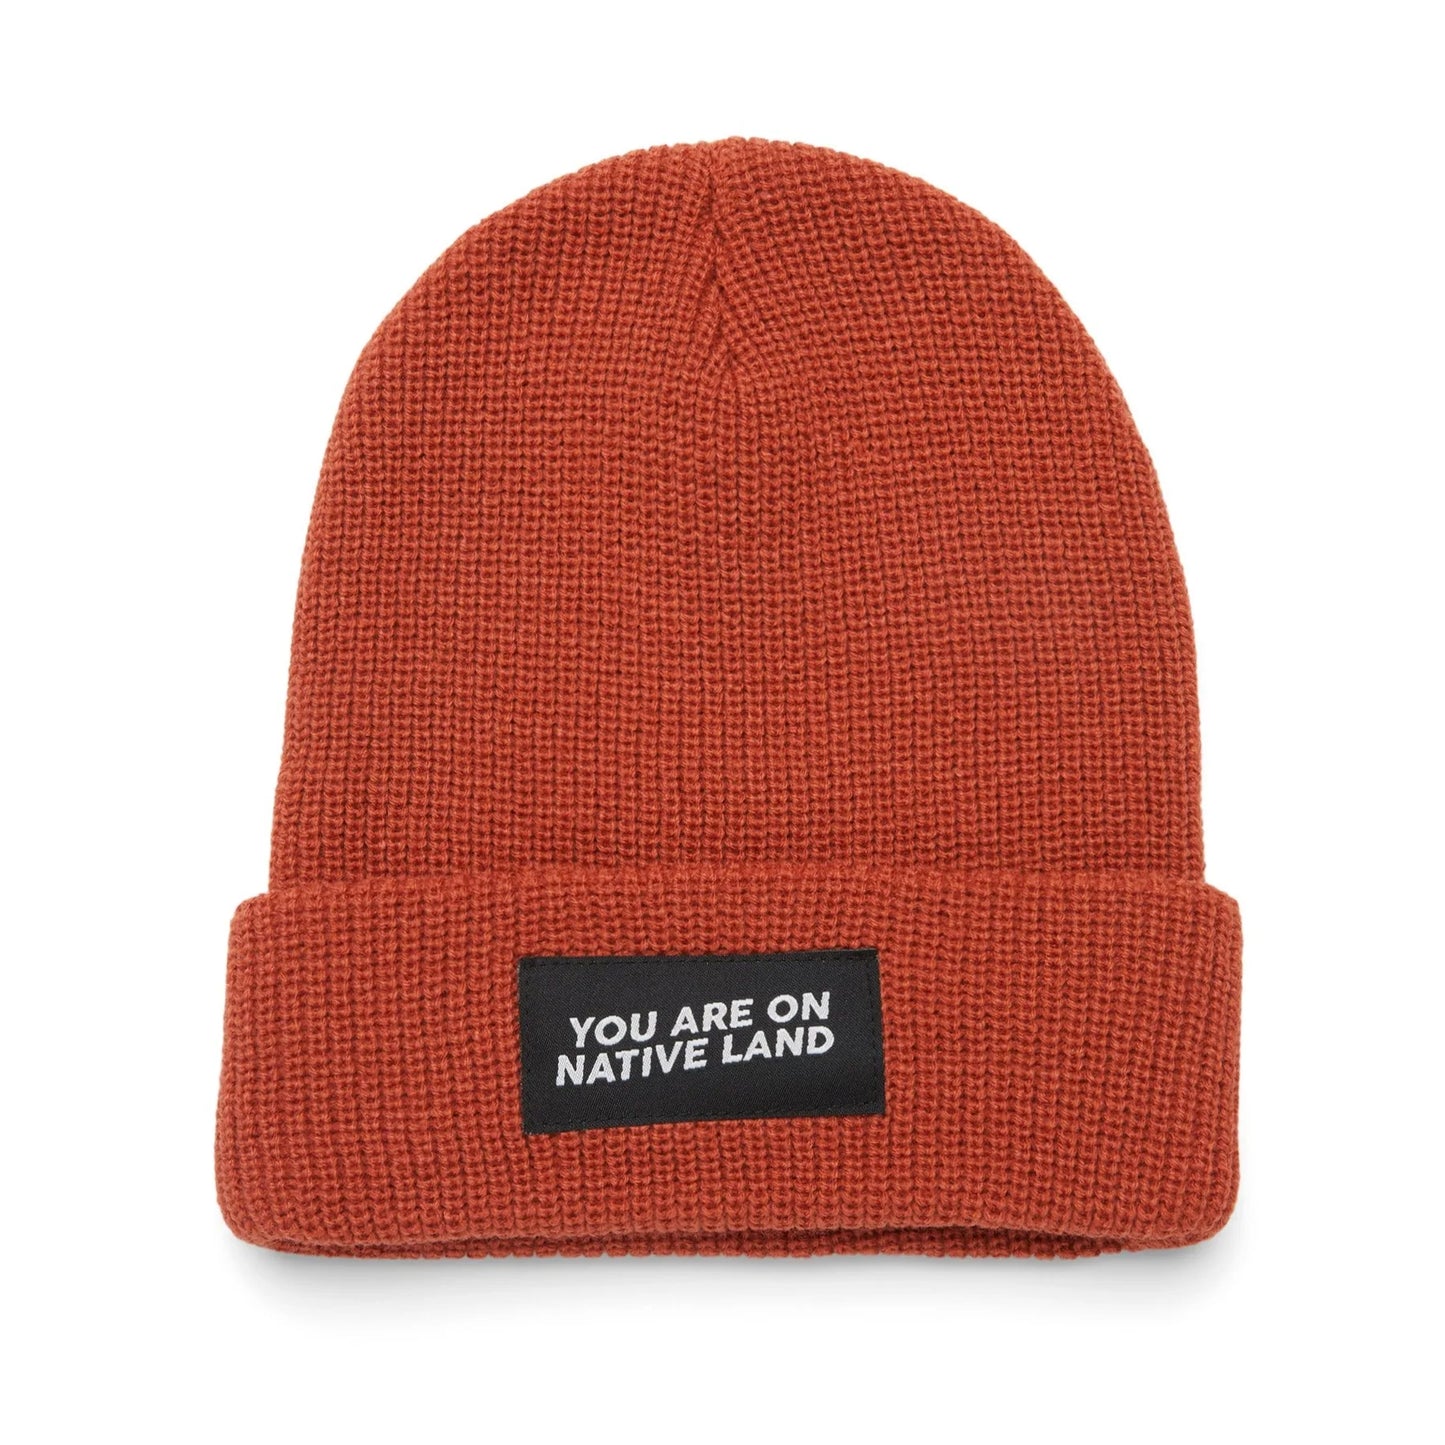 'YOU ARE ON NATIVE LAND' Beanie